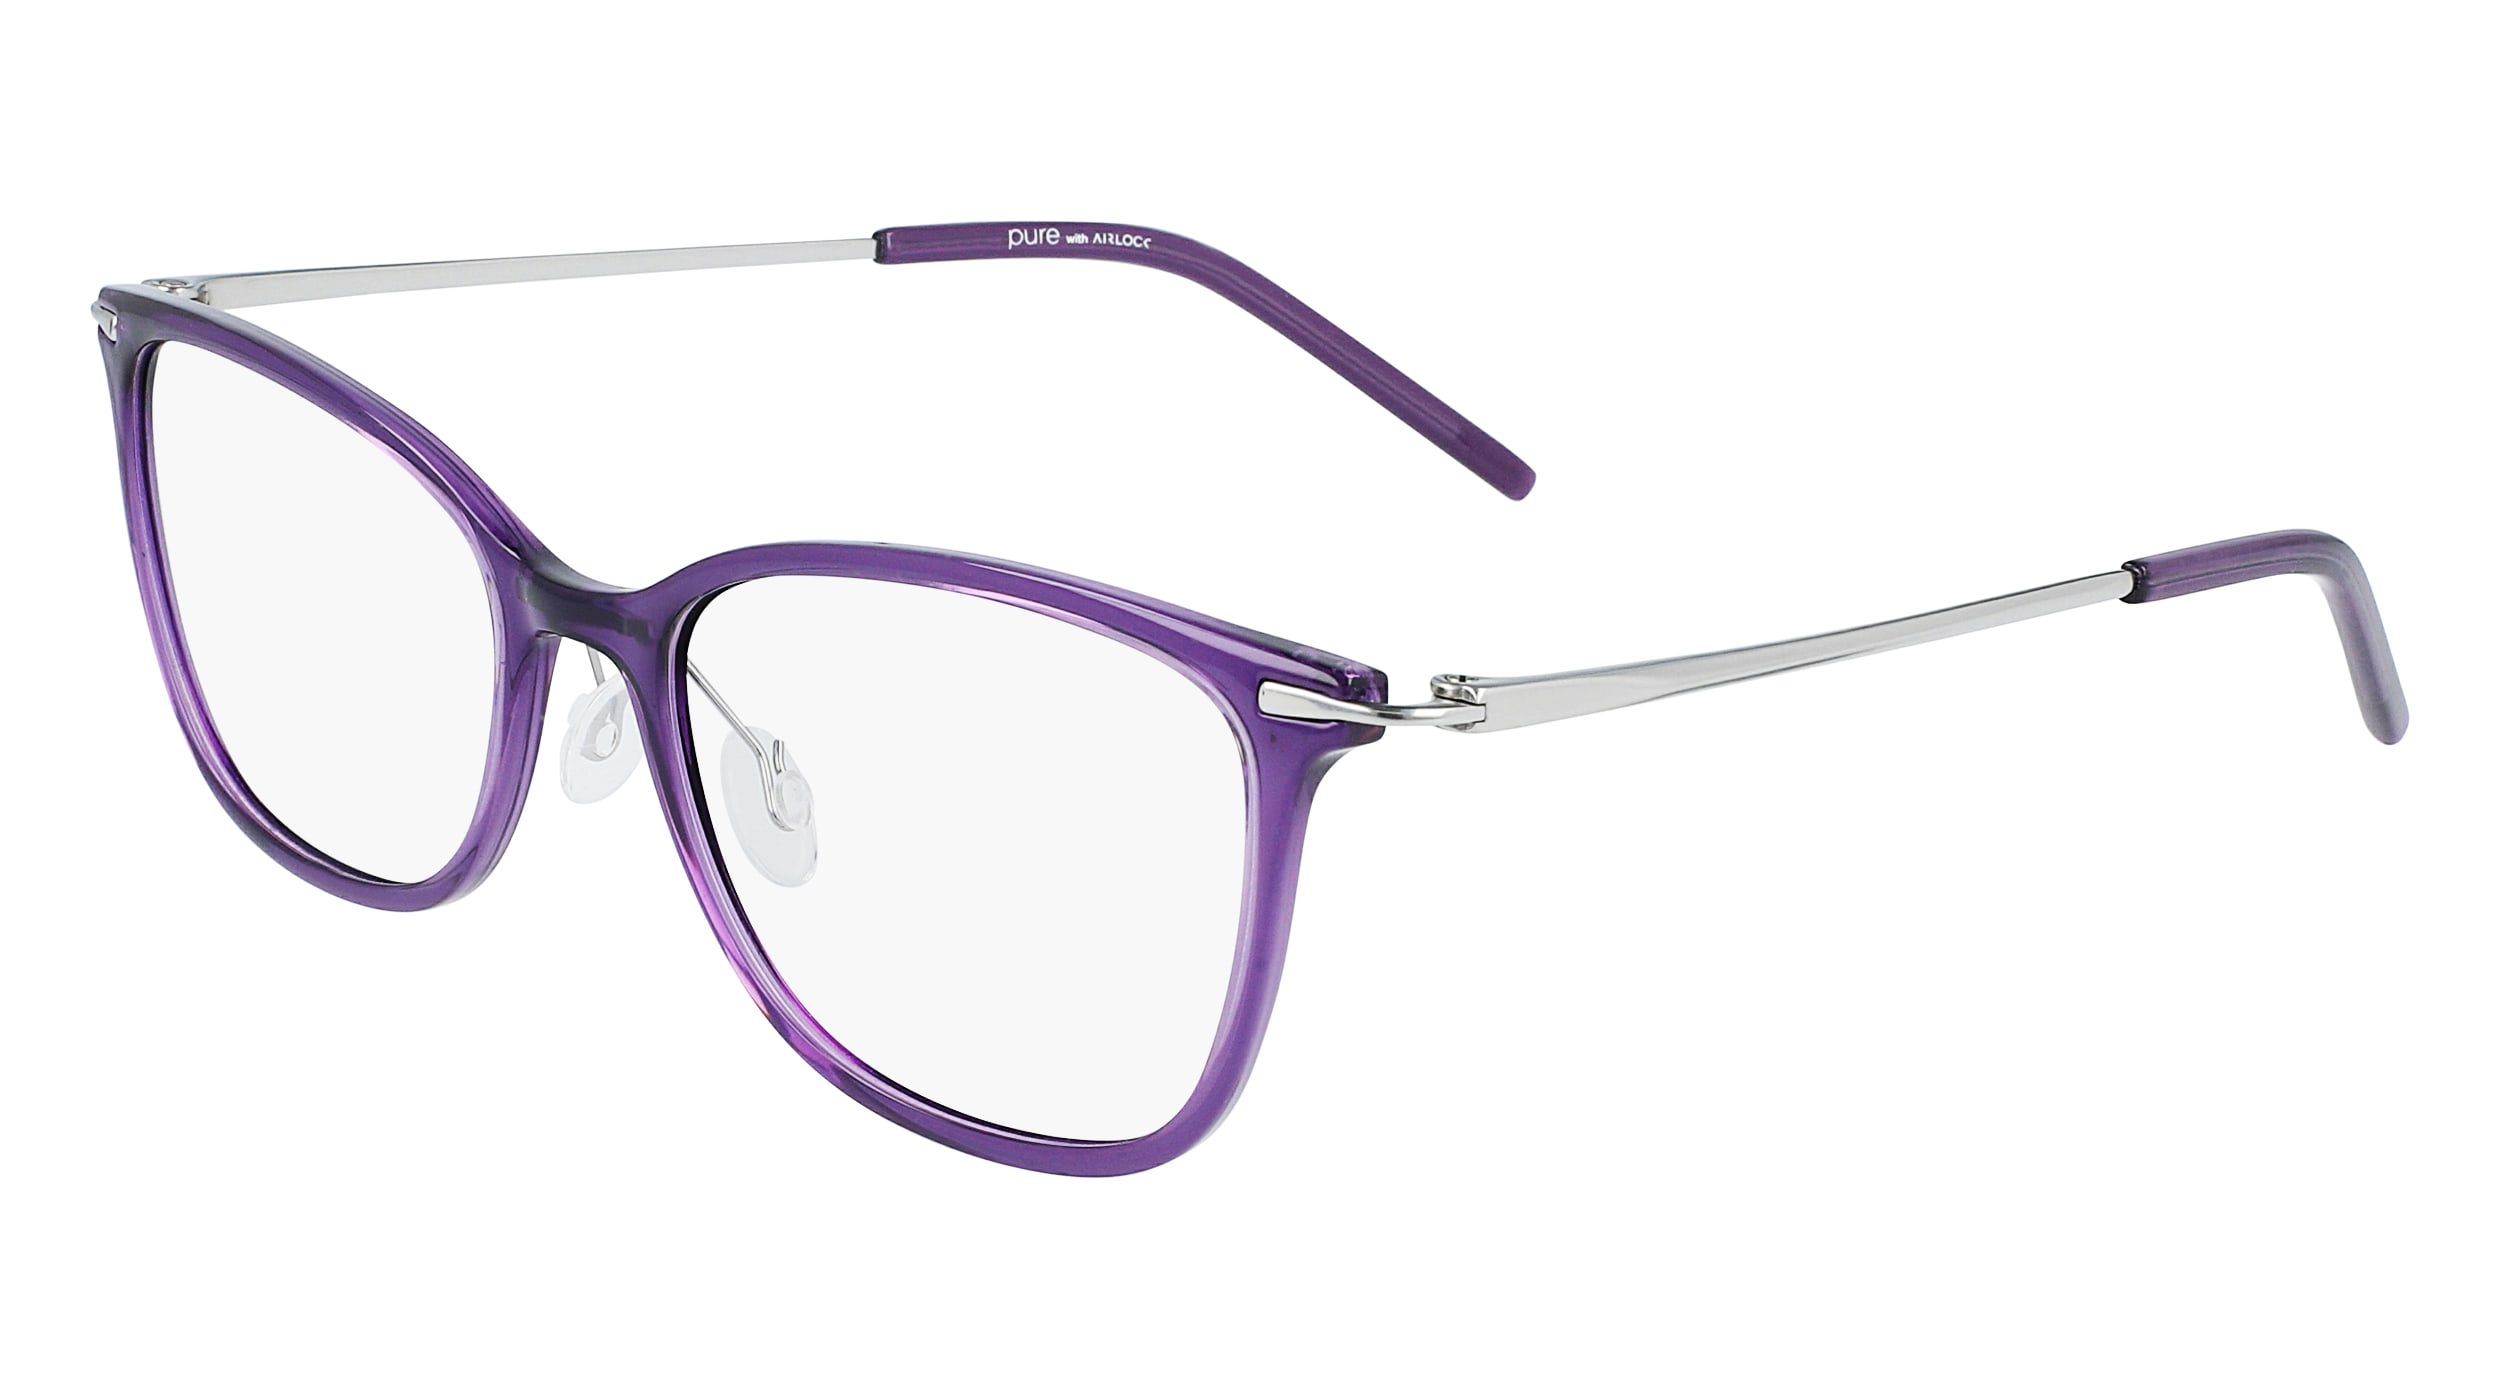 browse-vsp-s-frame-gallery-find-glasses-that-fit-your-style